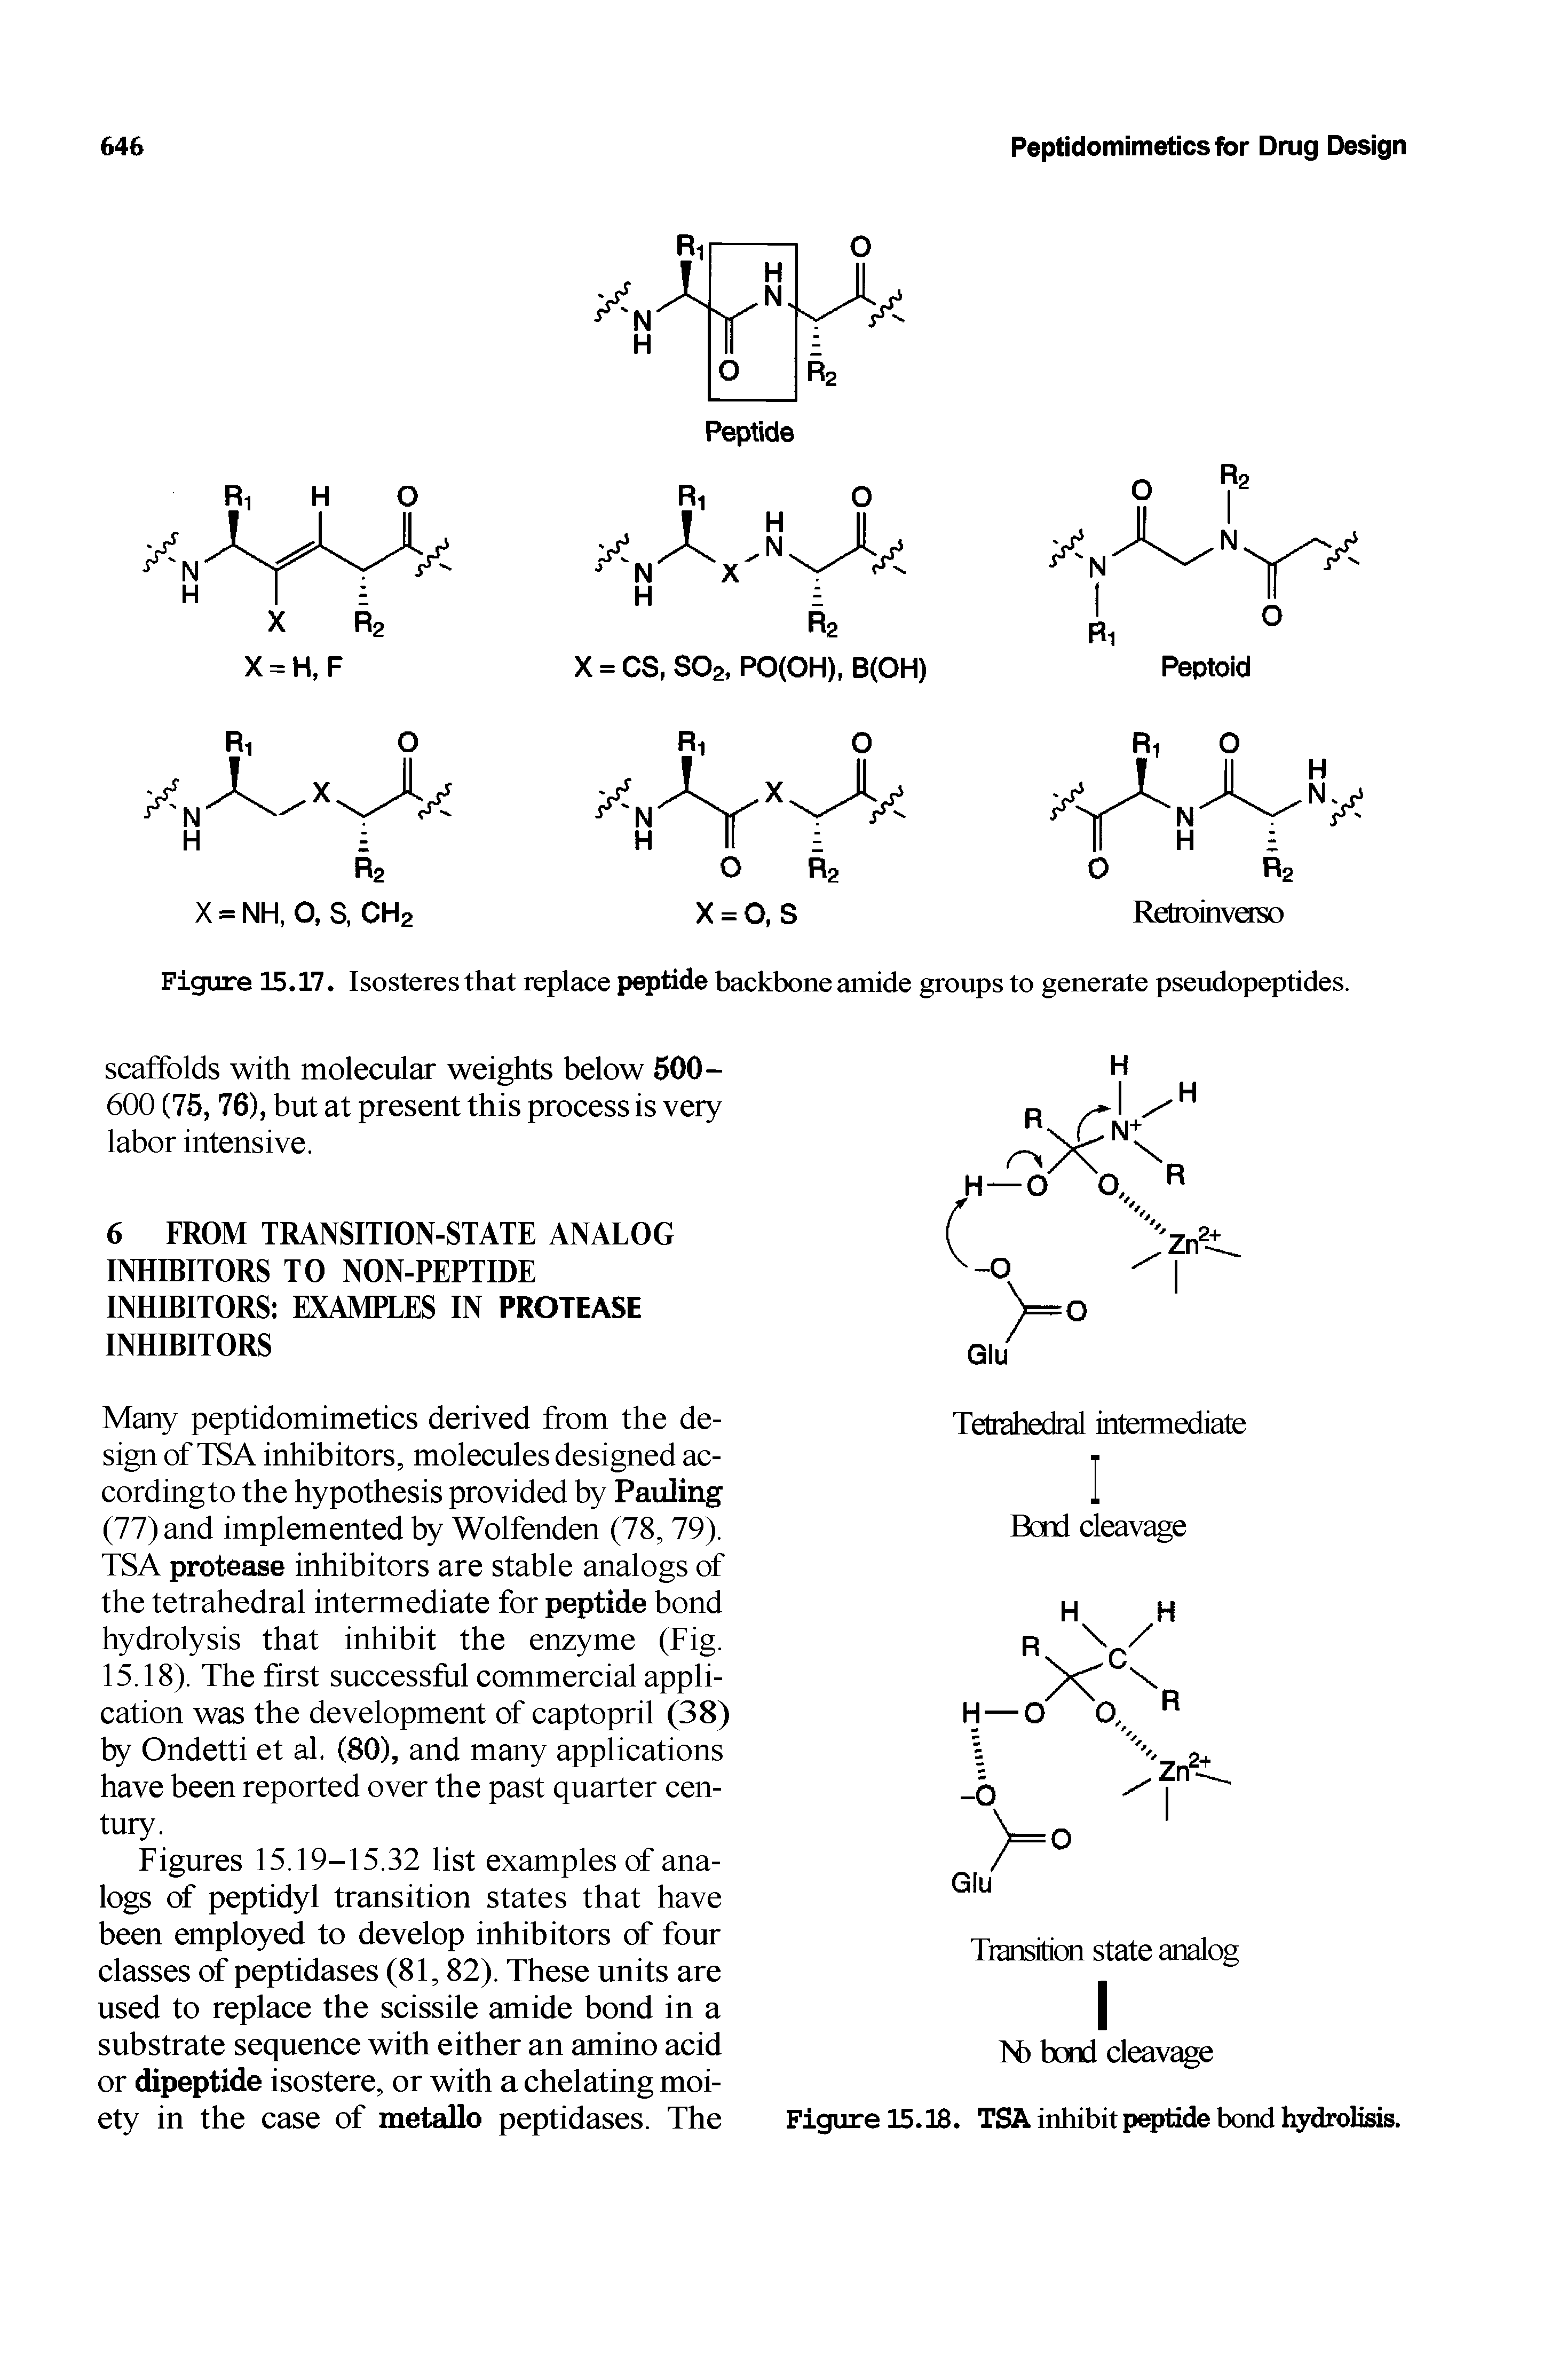 Figures 15.19-15.32 list examples of analogs of peptidyl transition states that have been employed to develop inhibitors of four classes of peptidases (81,82). These units are used to replace the scissile amide bond in a substrate sequence with either an amino acid or dipeptide isostere, or with a chelating moiety in the case of metallo peptidases. The...